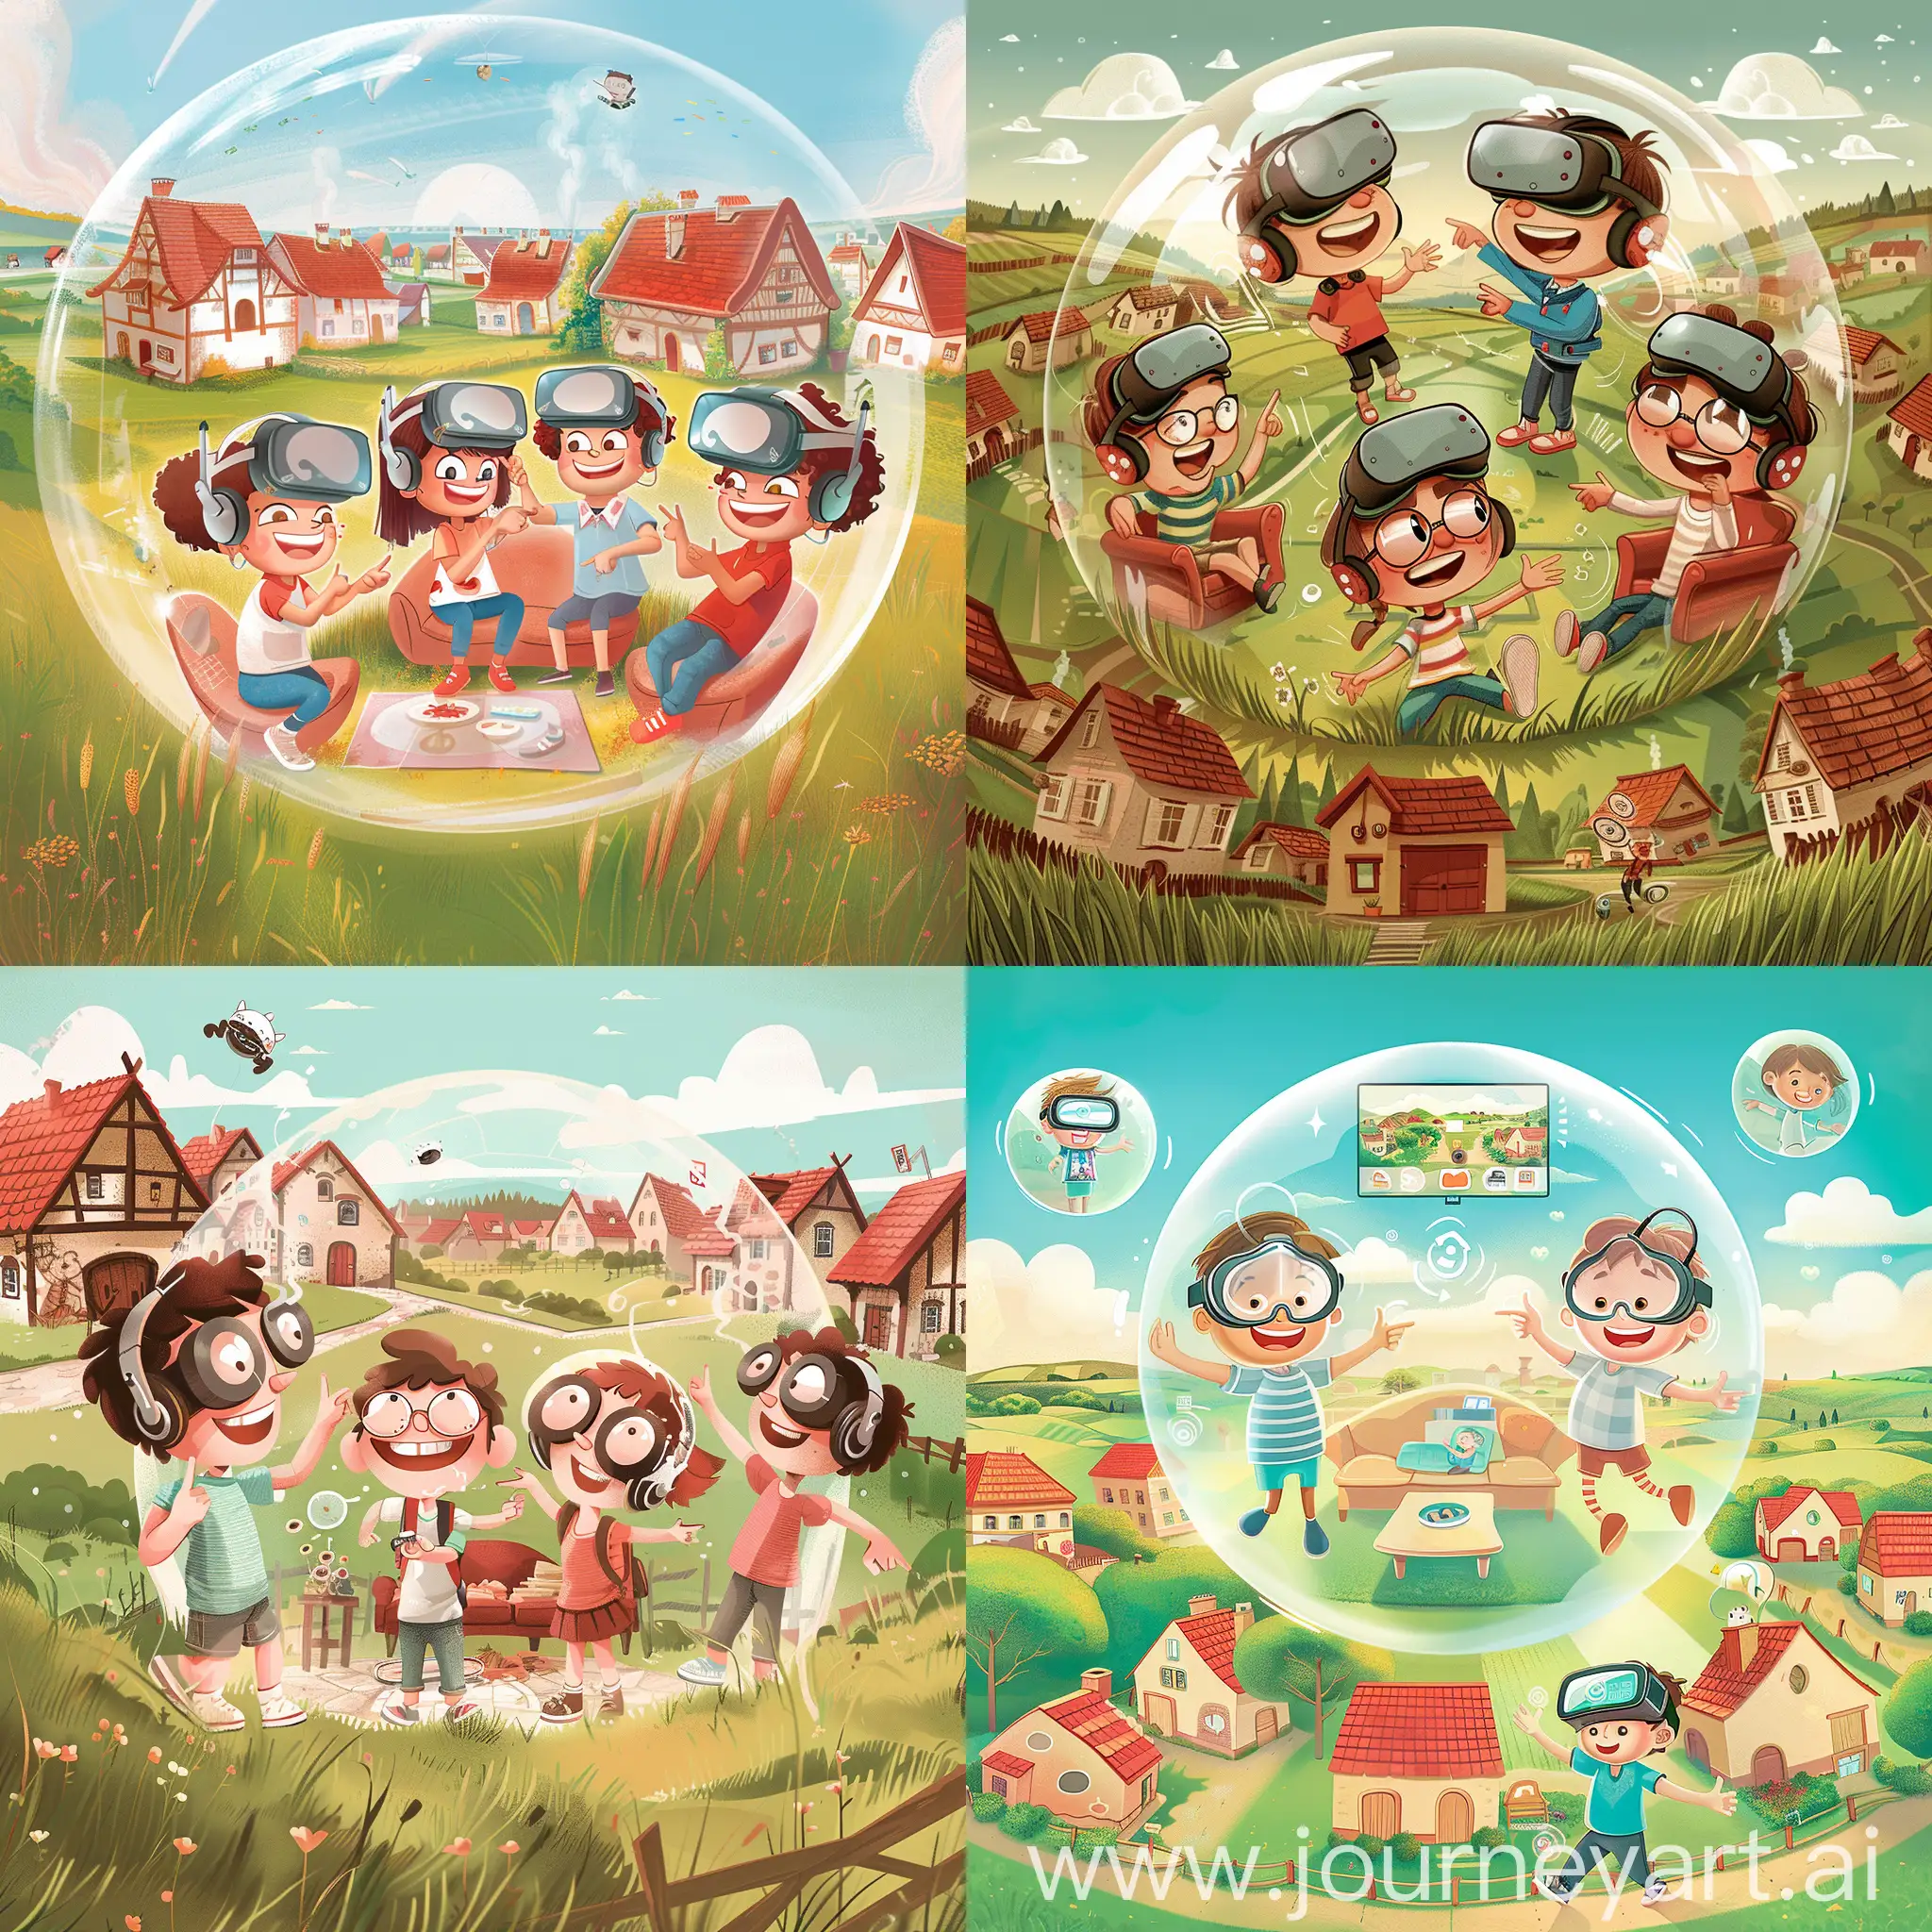 cartoon of 4 kids , far away from each others, having VR headset on, and around them they have a bubble that looks like a living room, they smile and point at things, the kids background is a village with red roofs houses and grass all over